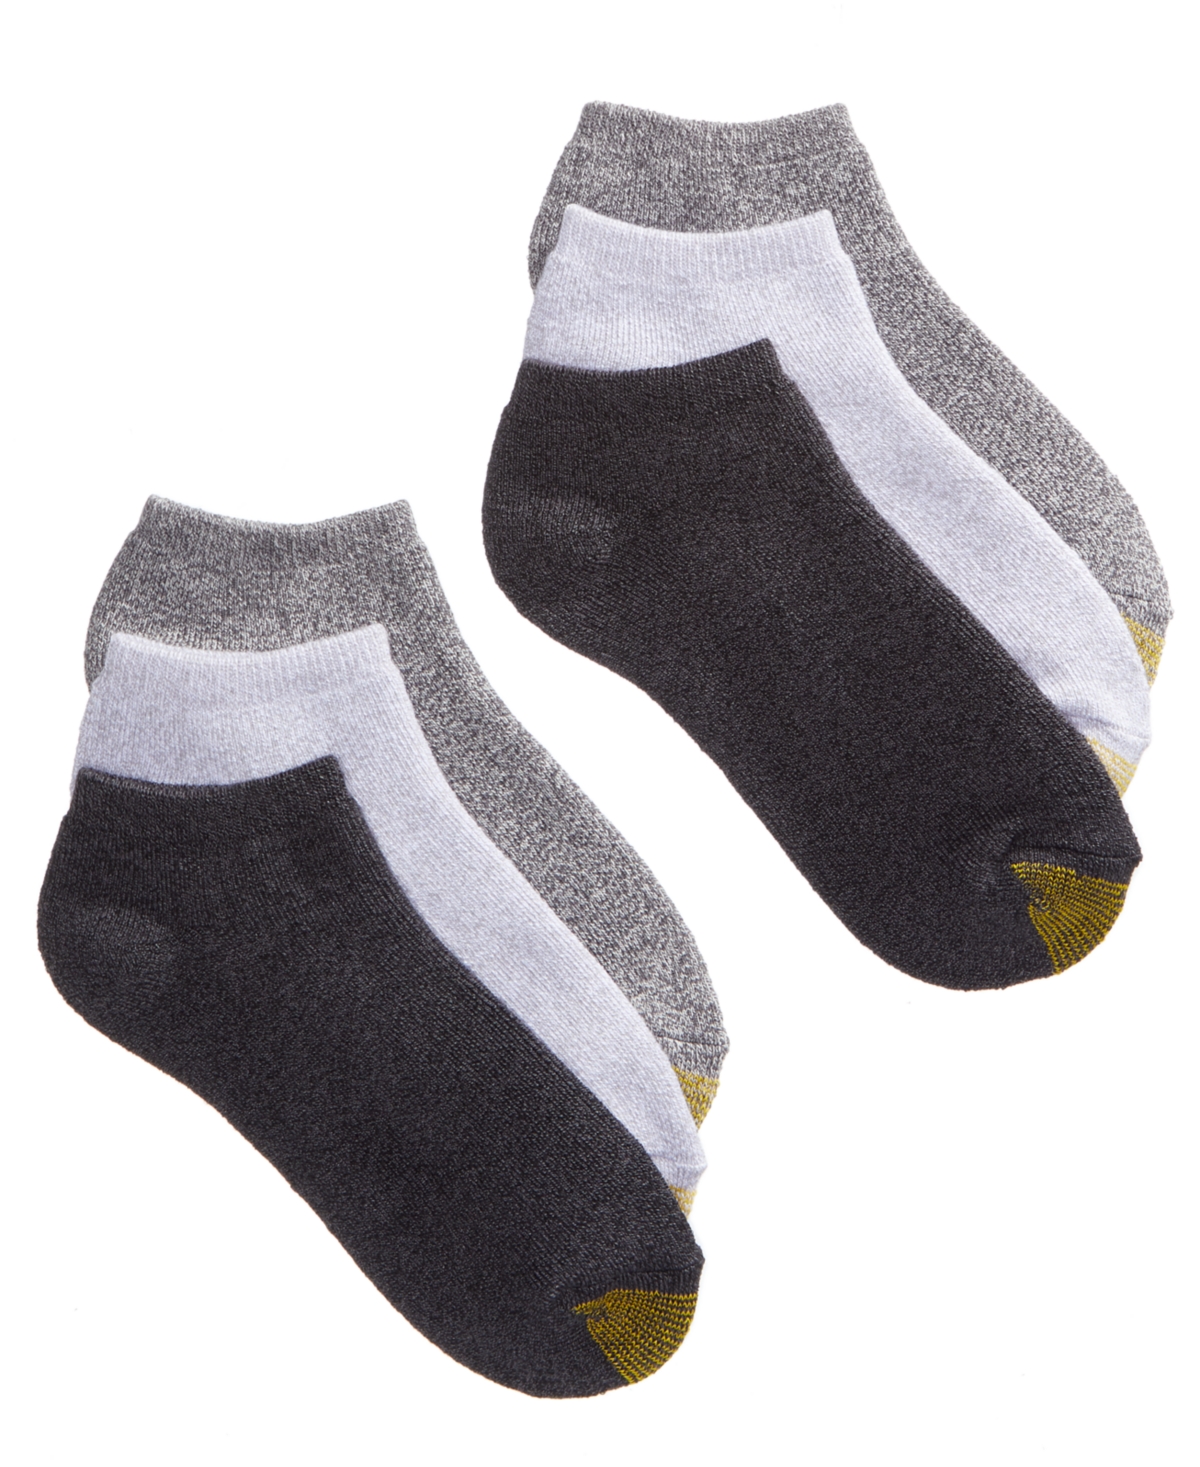 Women's 6-Pack Casual Ankle Cushion Socks - Grey Heather Assorted